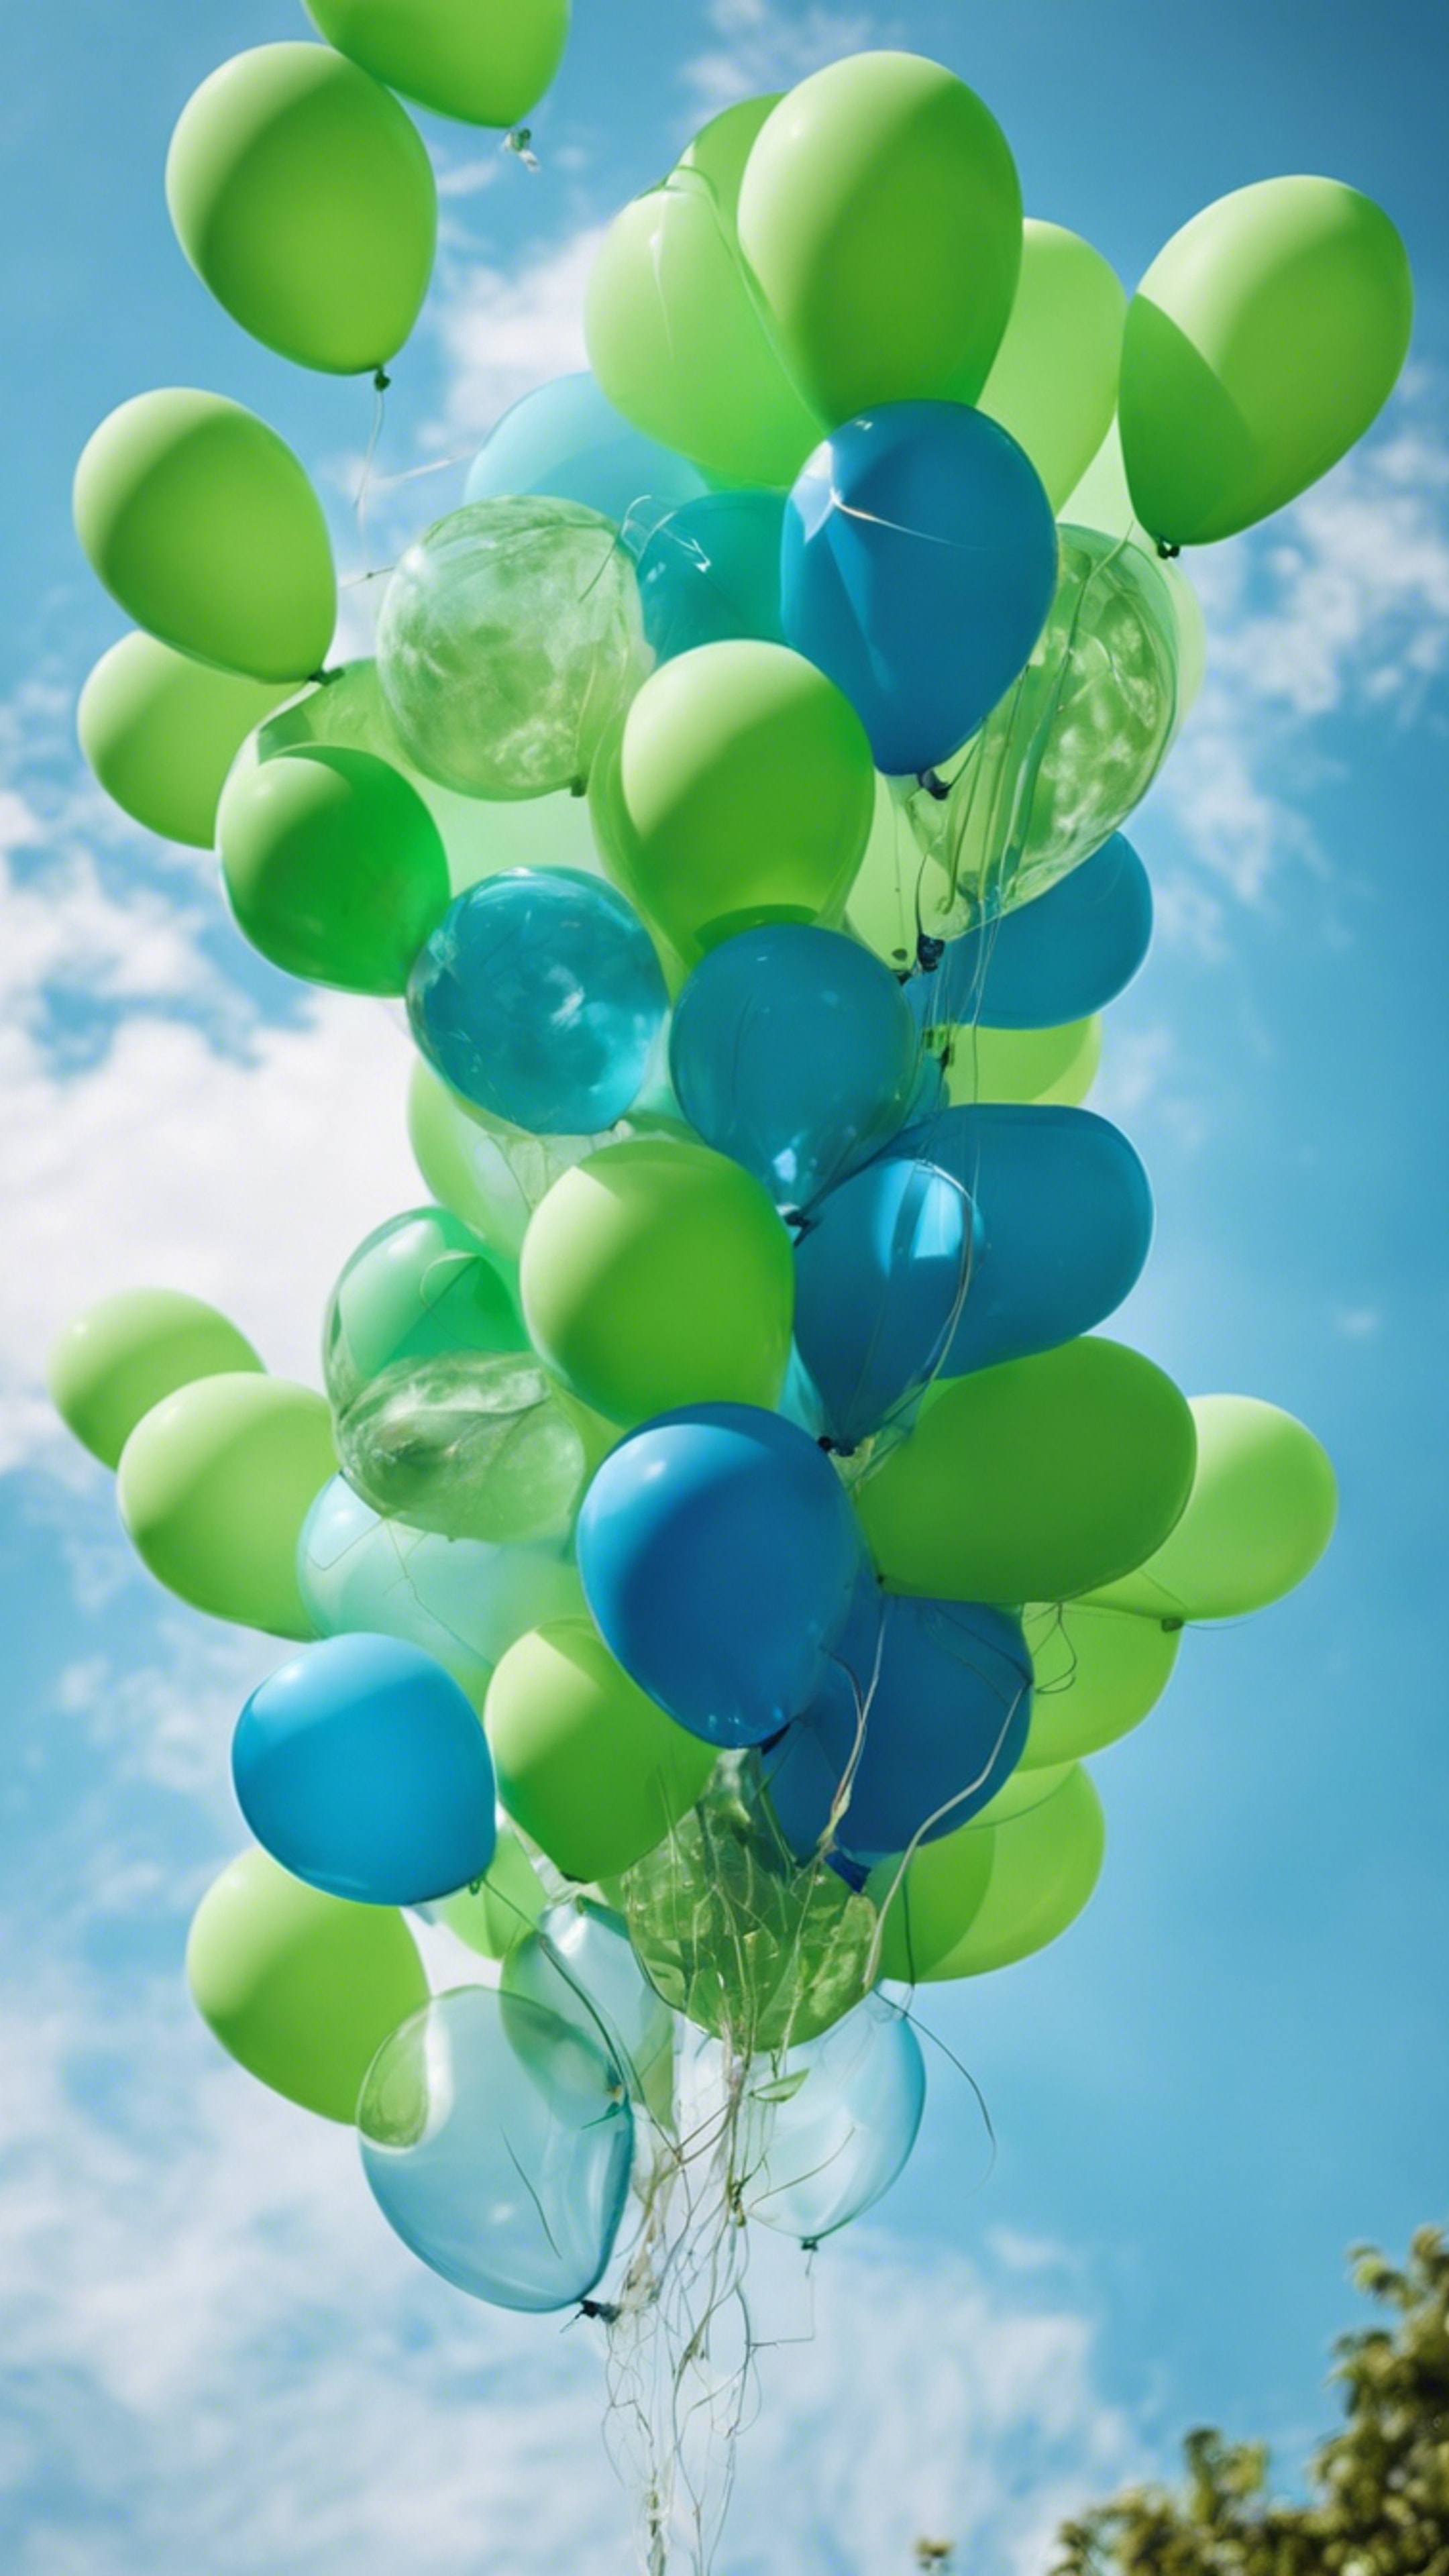 An array of blue and green balloons floating in a clear sky during the day. Обои[0f6c85f120014fa1a128]